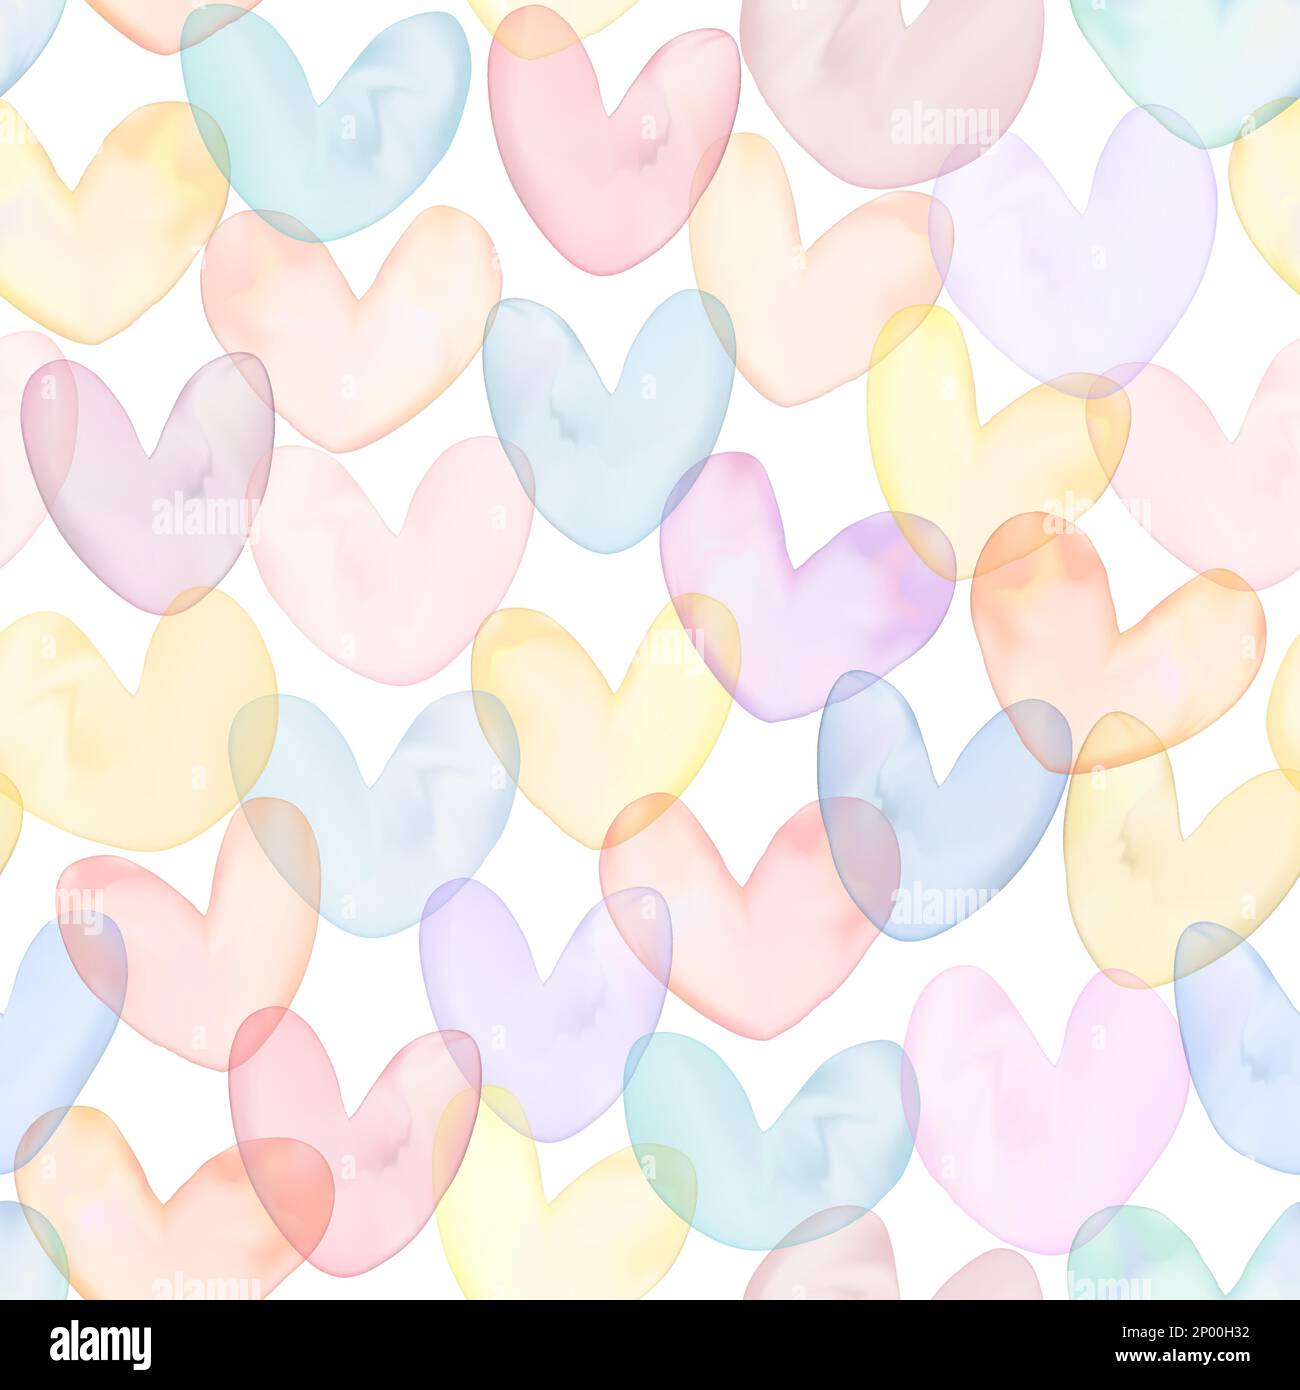 Vector Gradient Mesh Watercolor Drawing Multi Colors Overlapping Heart Shapes Seamless Pattern in Pastel Pink and Yellow. Stock Vector